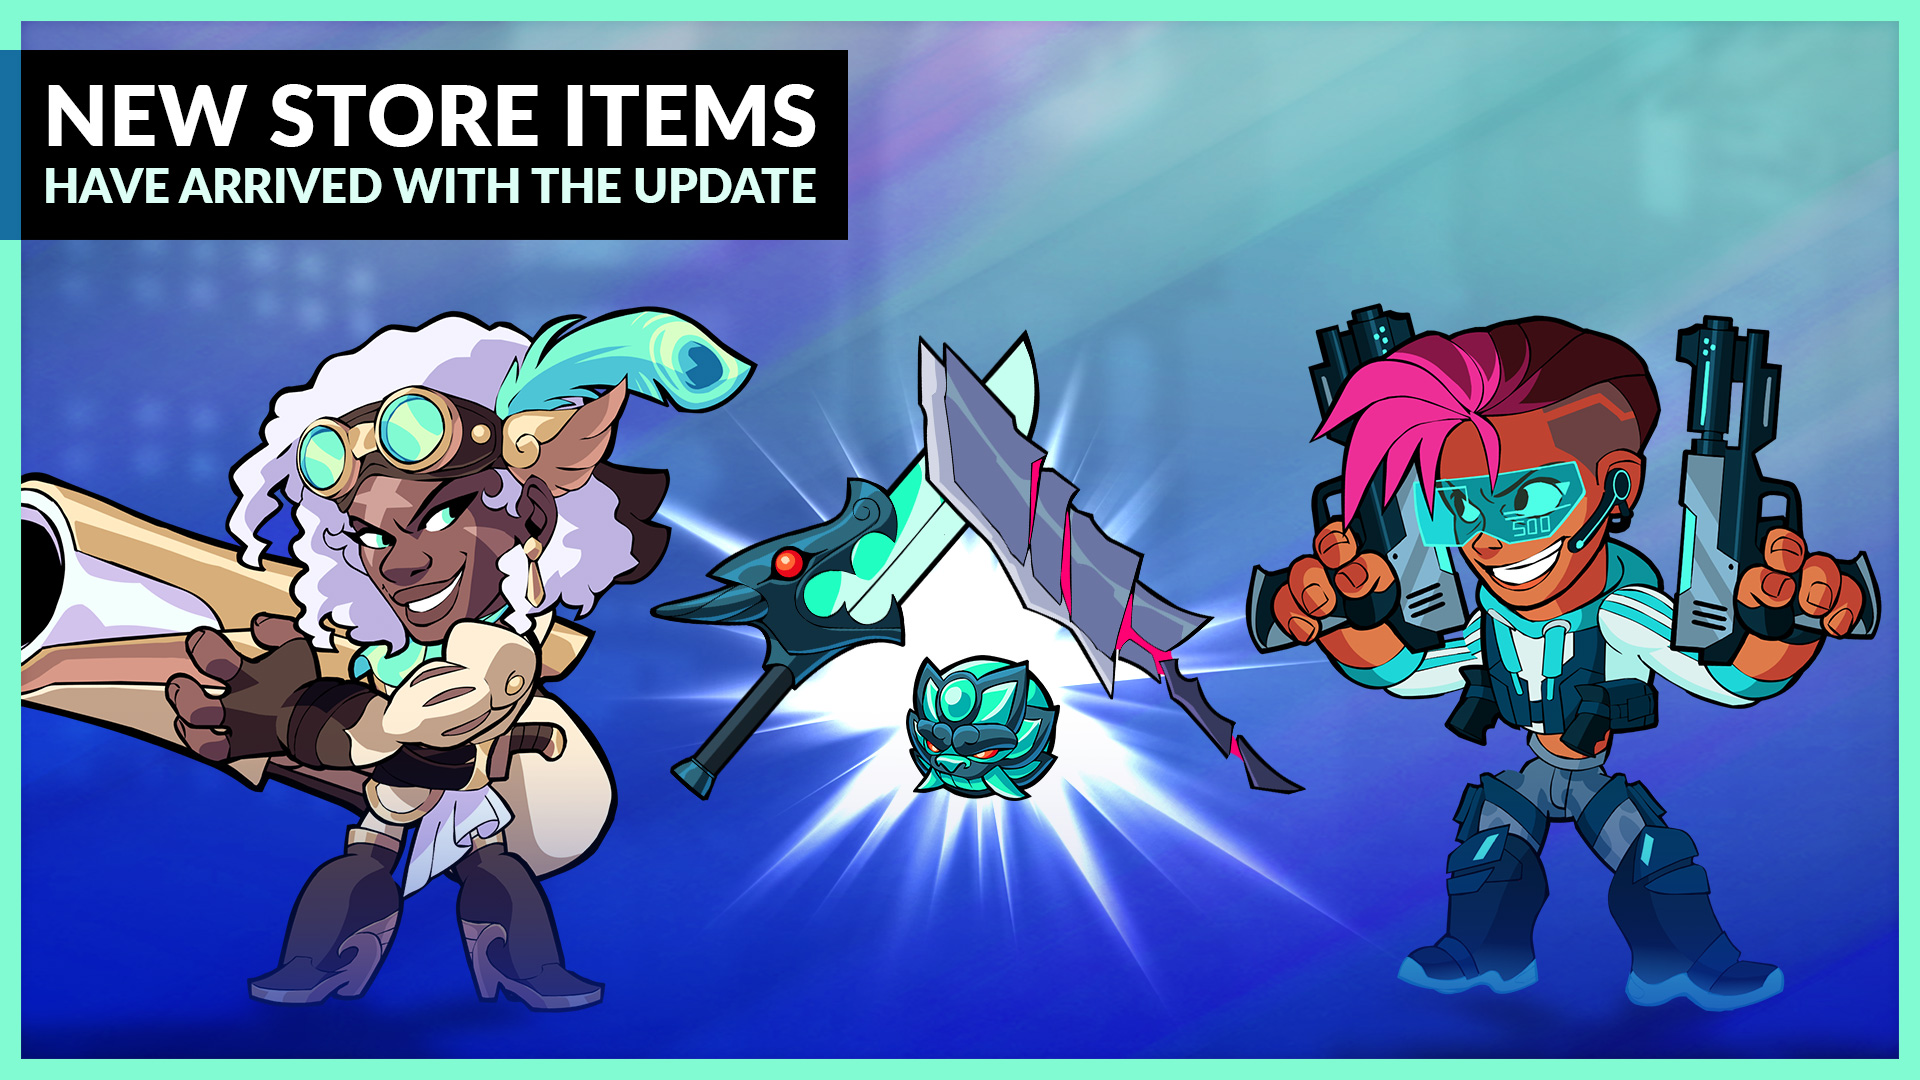 New Skins, Hurtboxing Adjustments, and More! &#8211; Patch 5.03